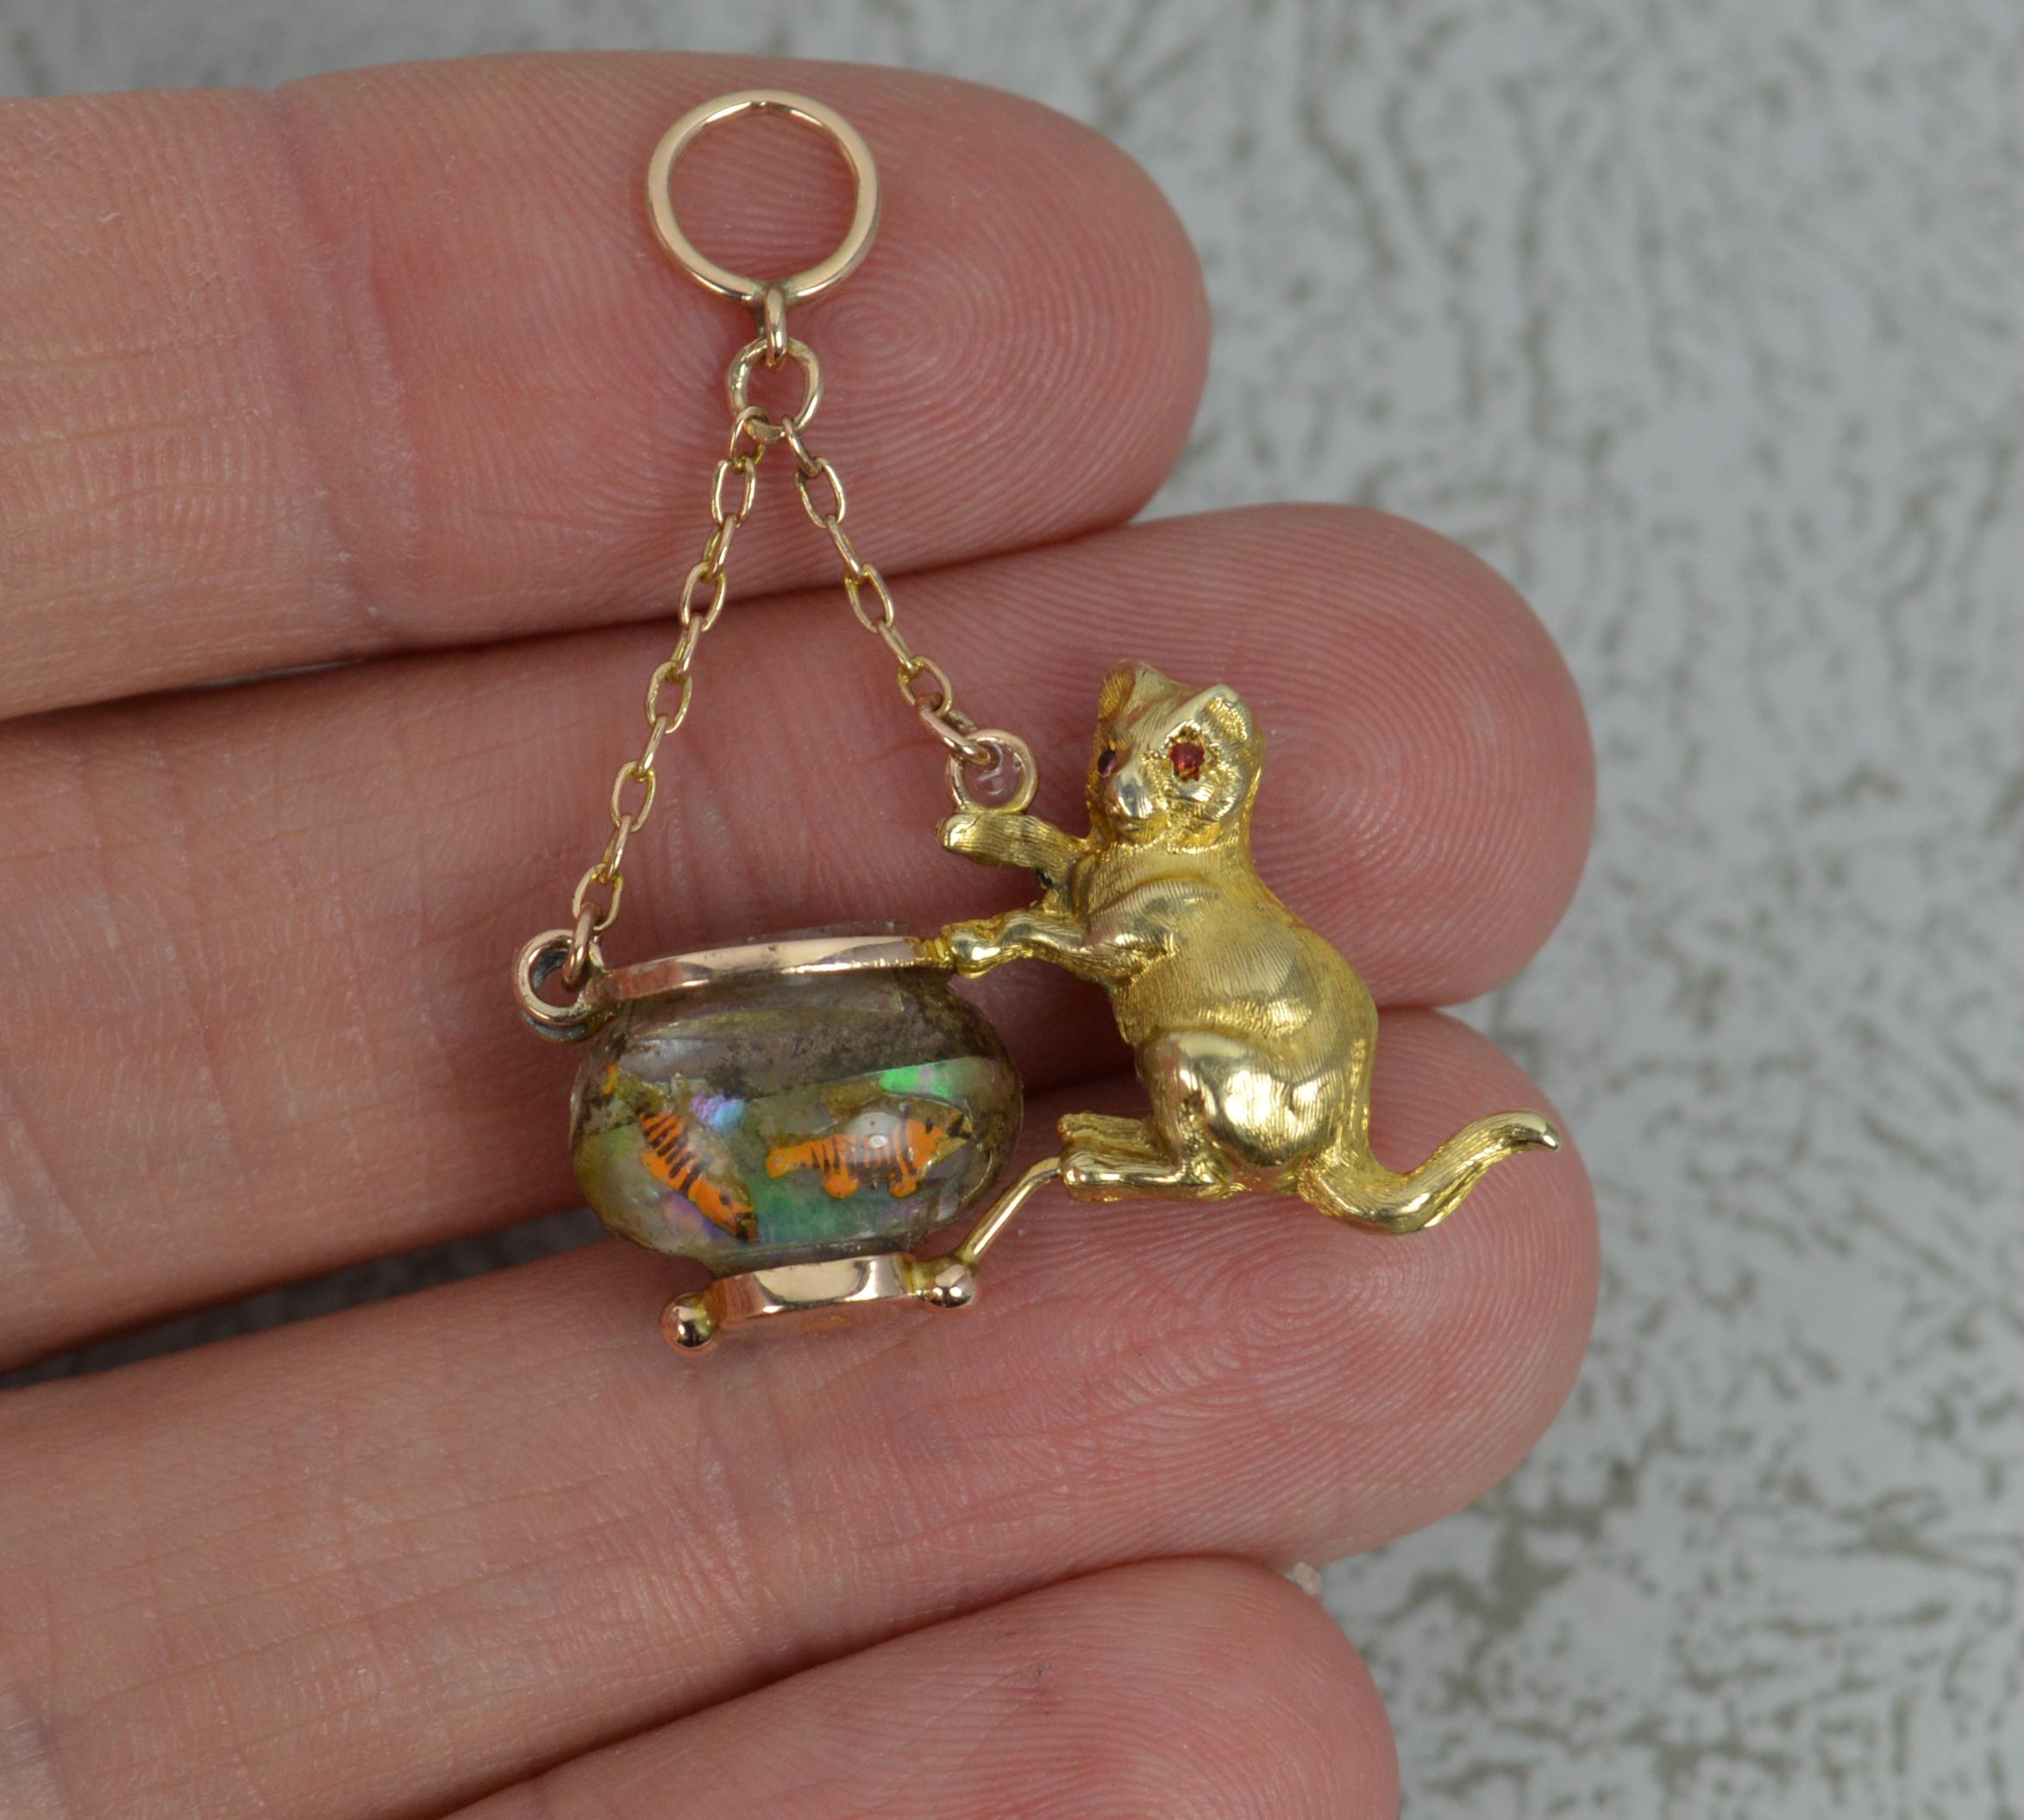 A highly unusual novelty charm pendant.
True antique piece, circa 1920.
Solid 9 carat rose gold example with glass fishing bowl.
Designed as a cat with one paw reaching up towards the two fish. On a lavalier chain pendant.

CONDITION ; Good for age.